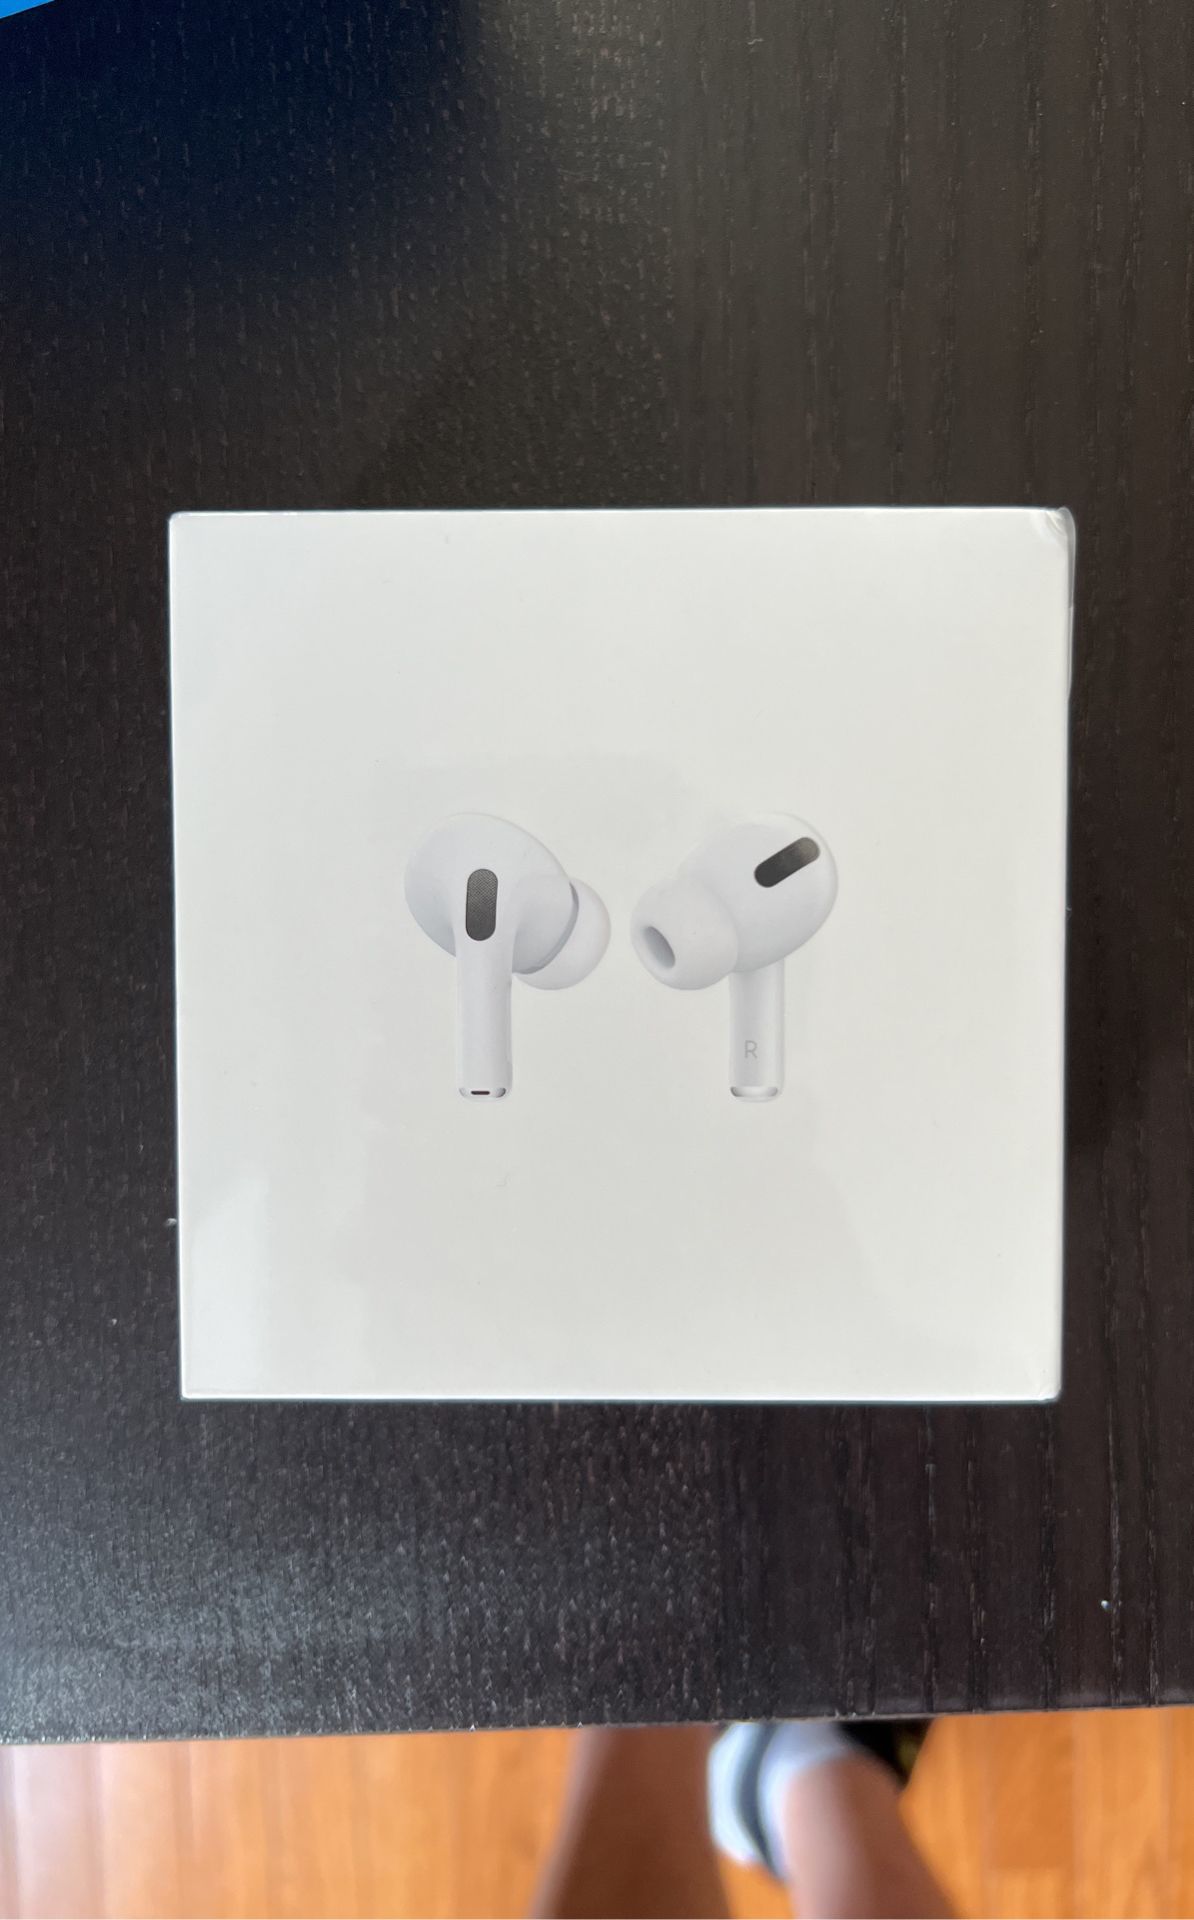 Brand New AirPods Pro